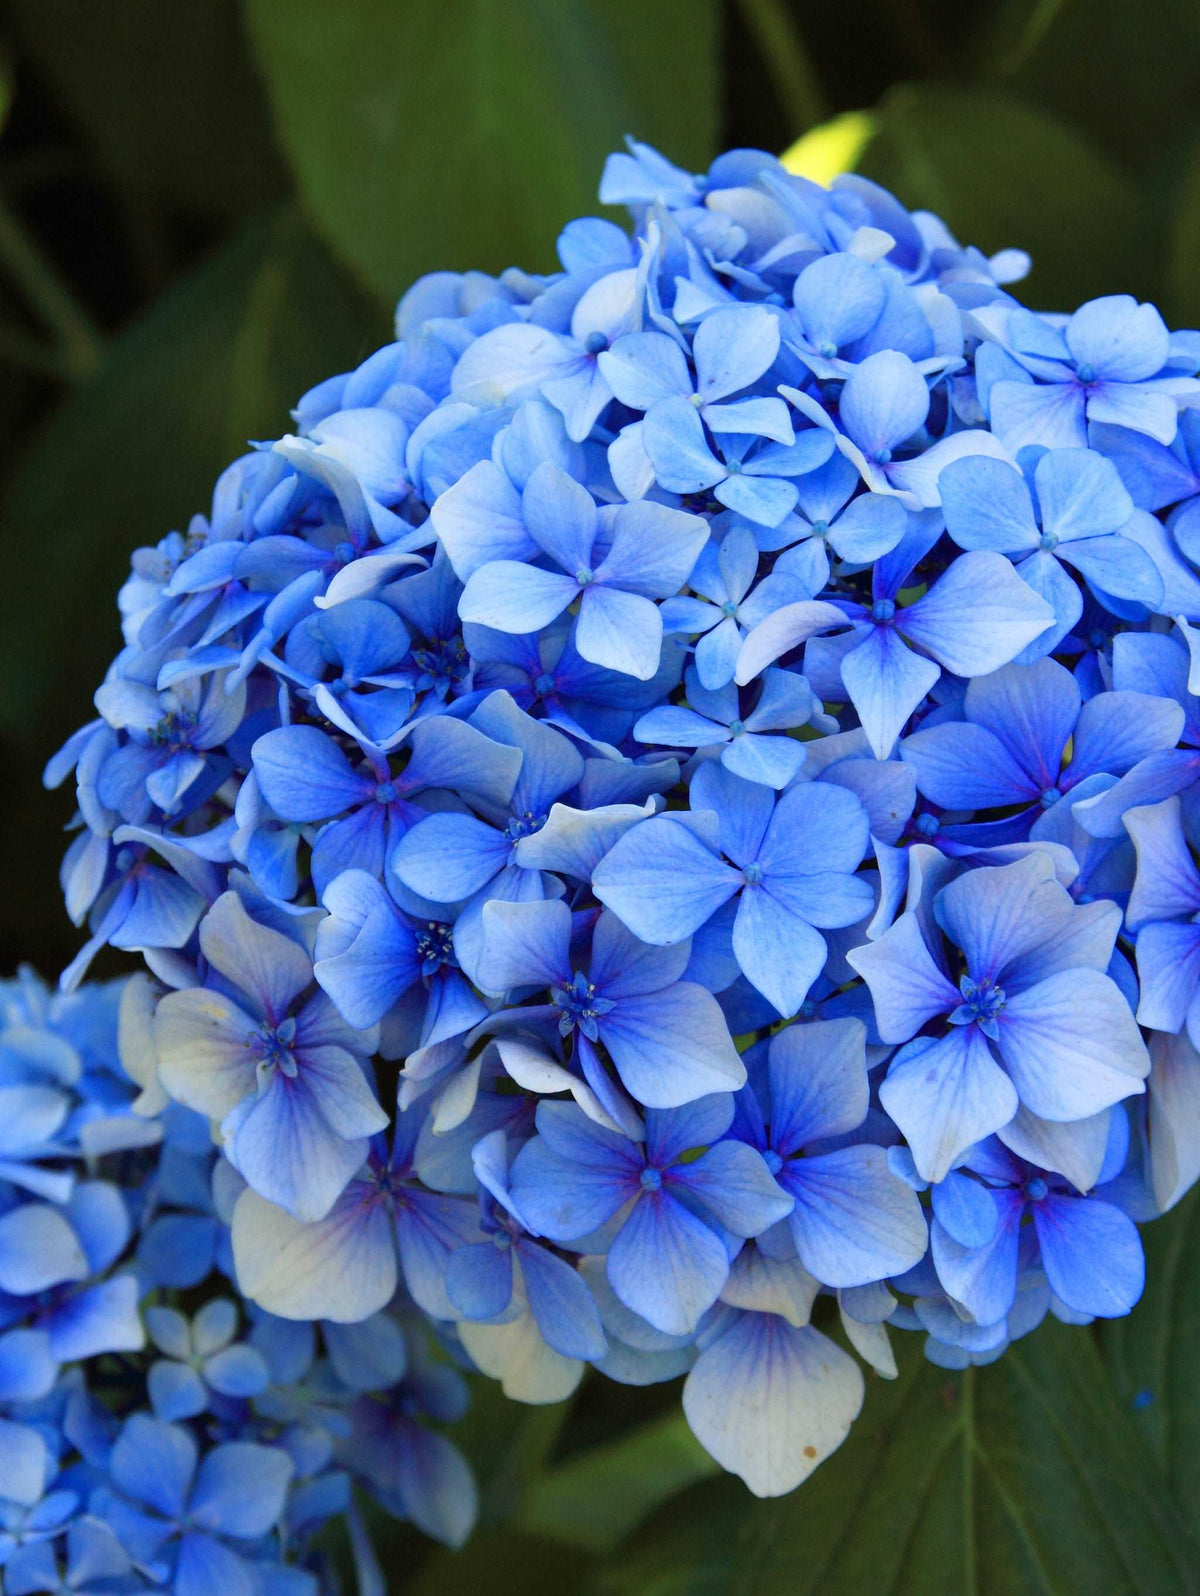 Image of Forever hydrangea close up blue